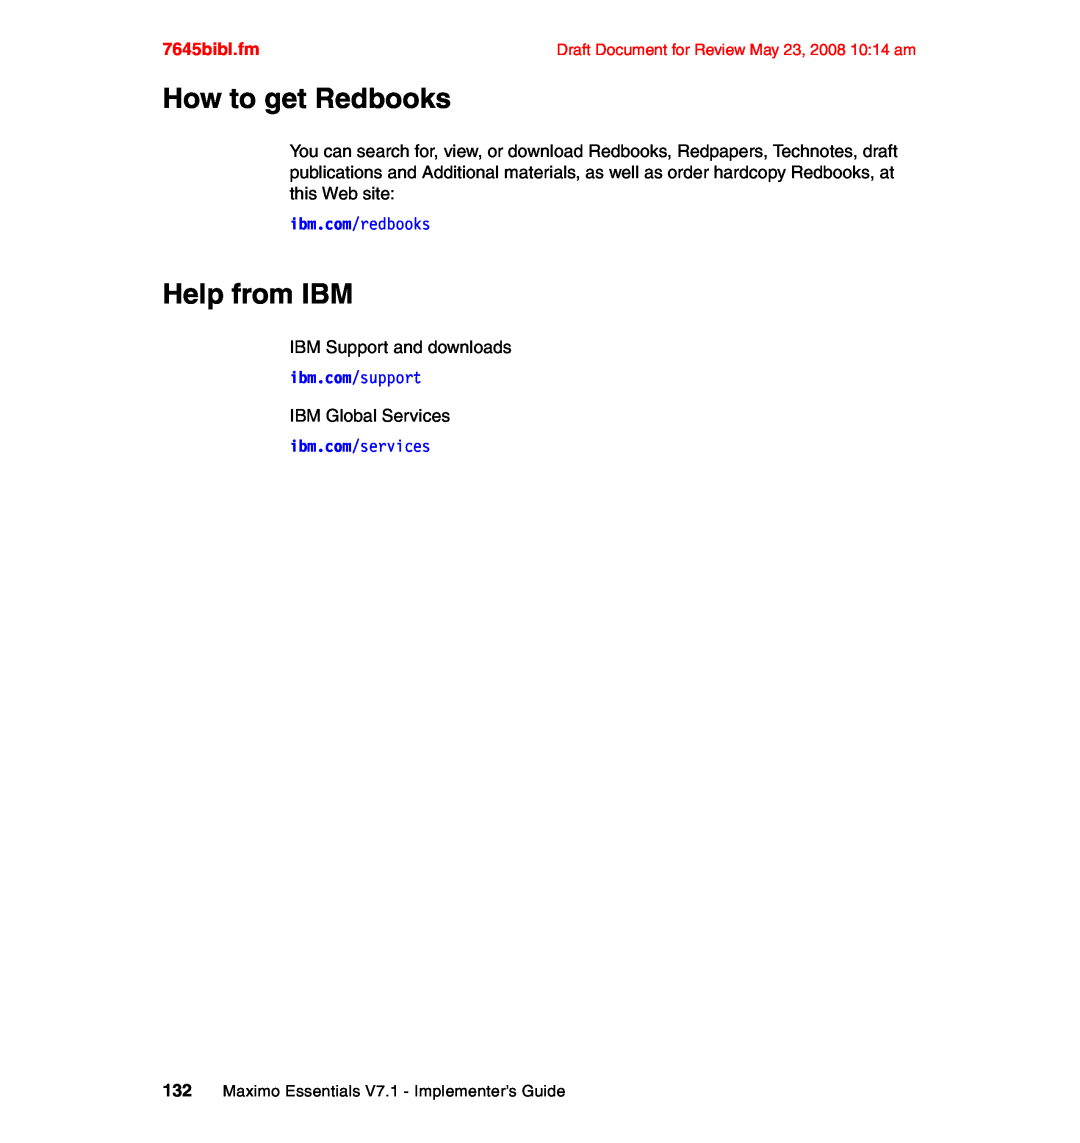 IBM SG24-7645-00 manual How to get Redbooks, Help from IBM, 7645bibl.fm, IBM Support and downloads, IBM Global Services 